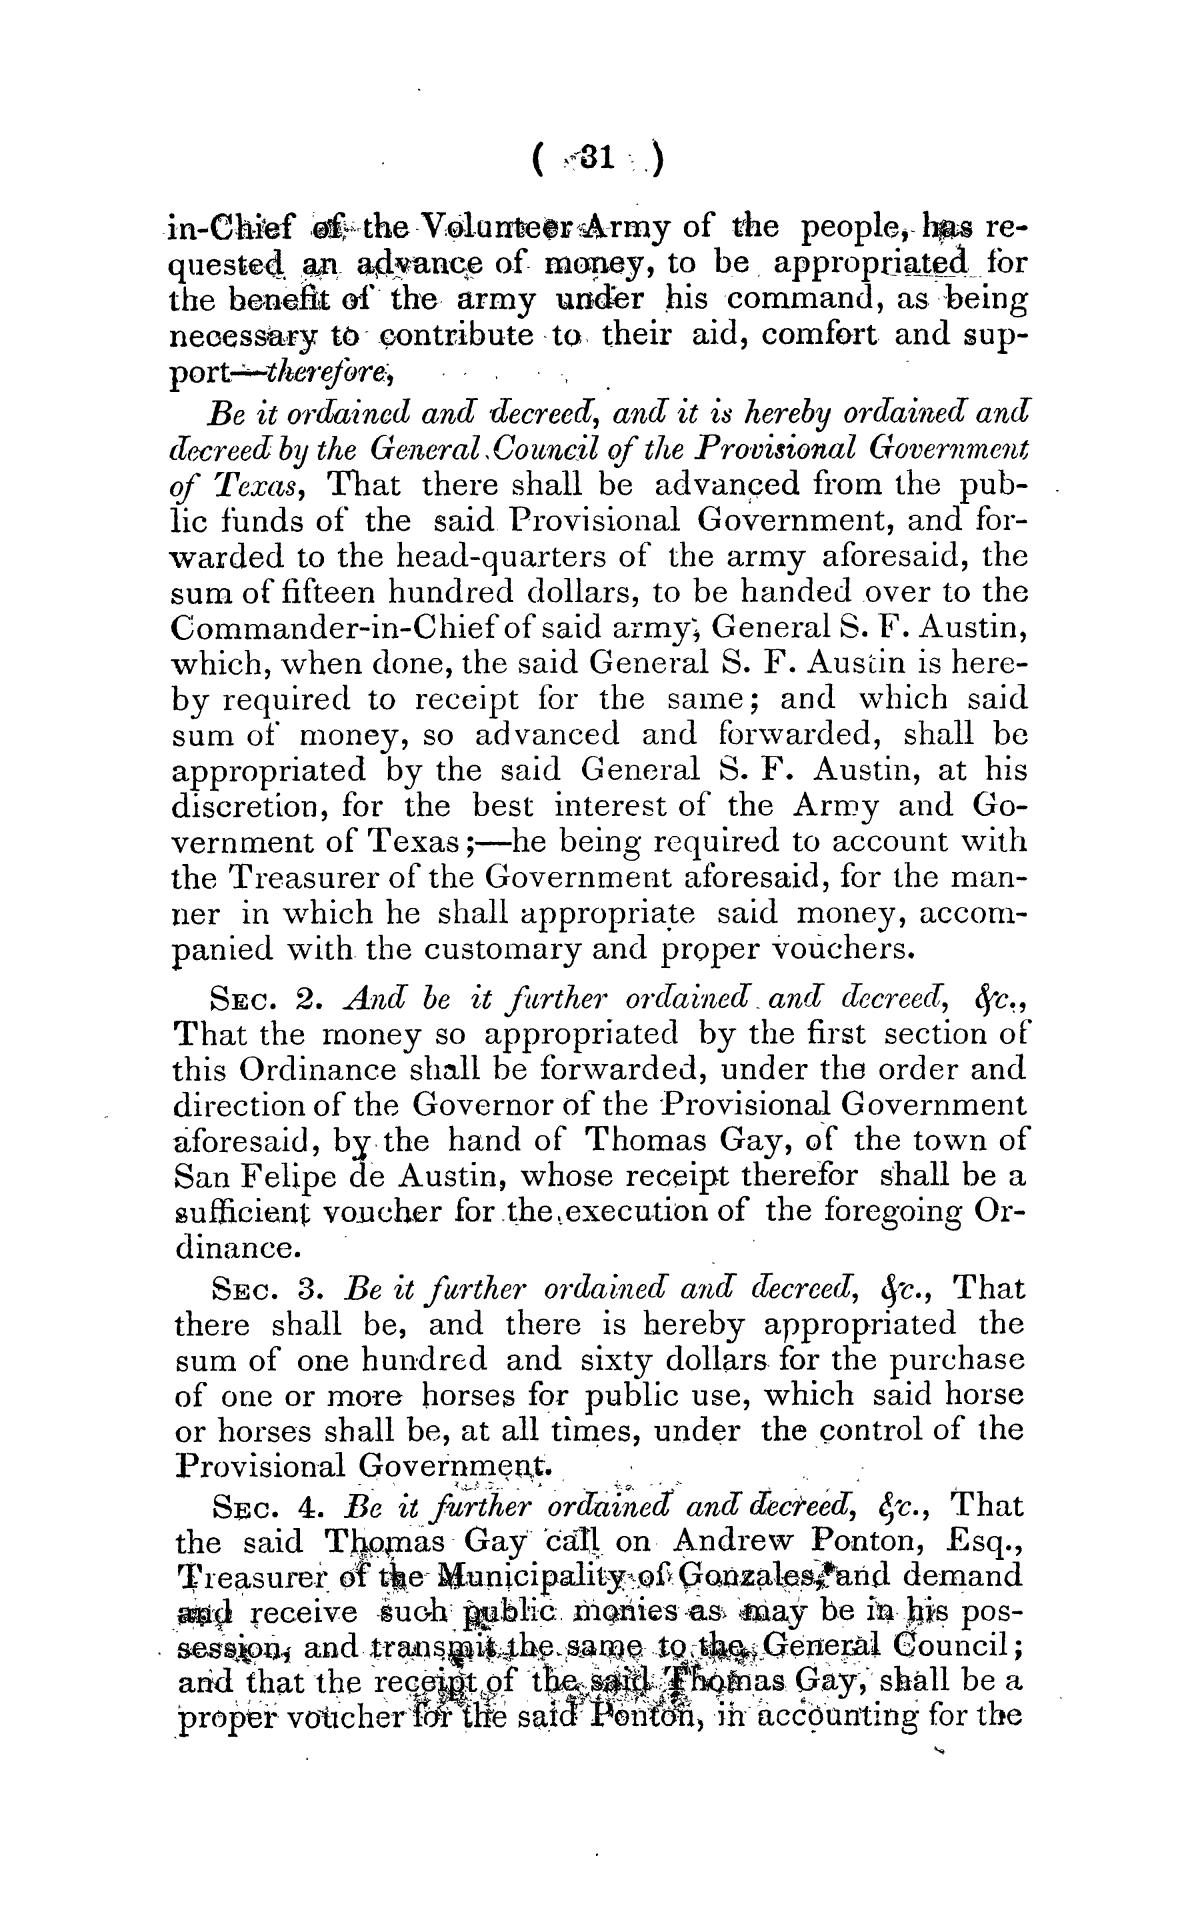 Ordinances and Decrees of the Consultation, Provisional Government of Texas and the Convention, Which Assembled at Washington March 1, 1836.
                                                
                                                    31
                                                